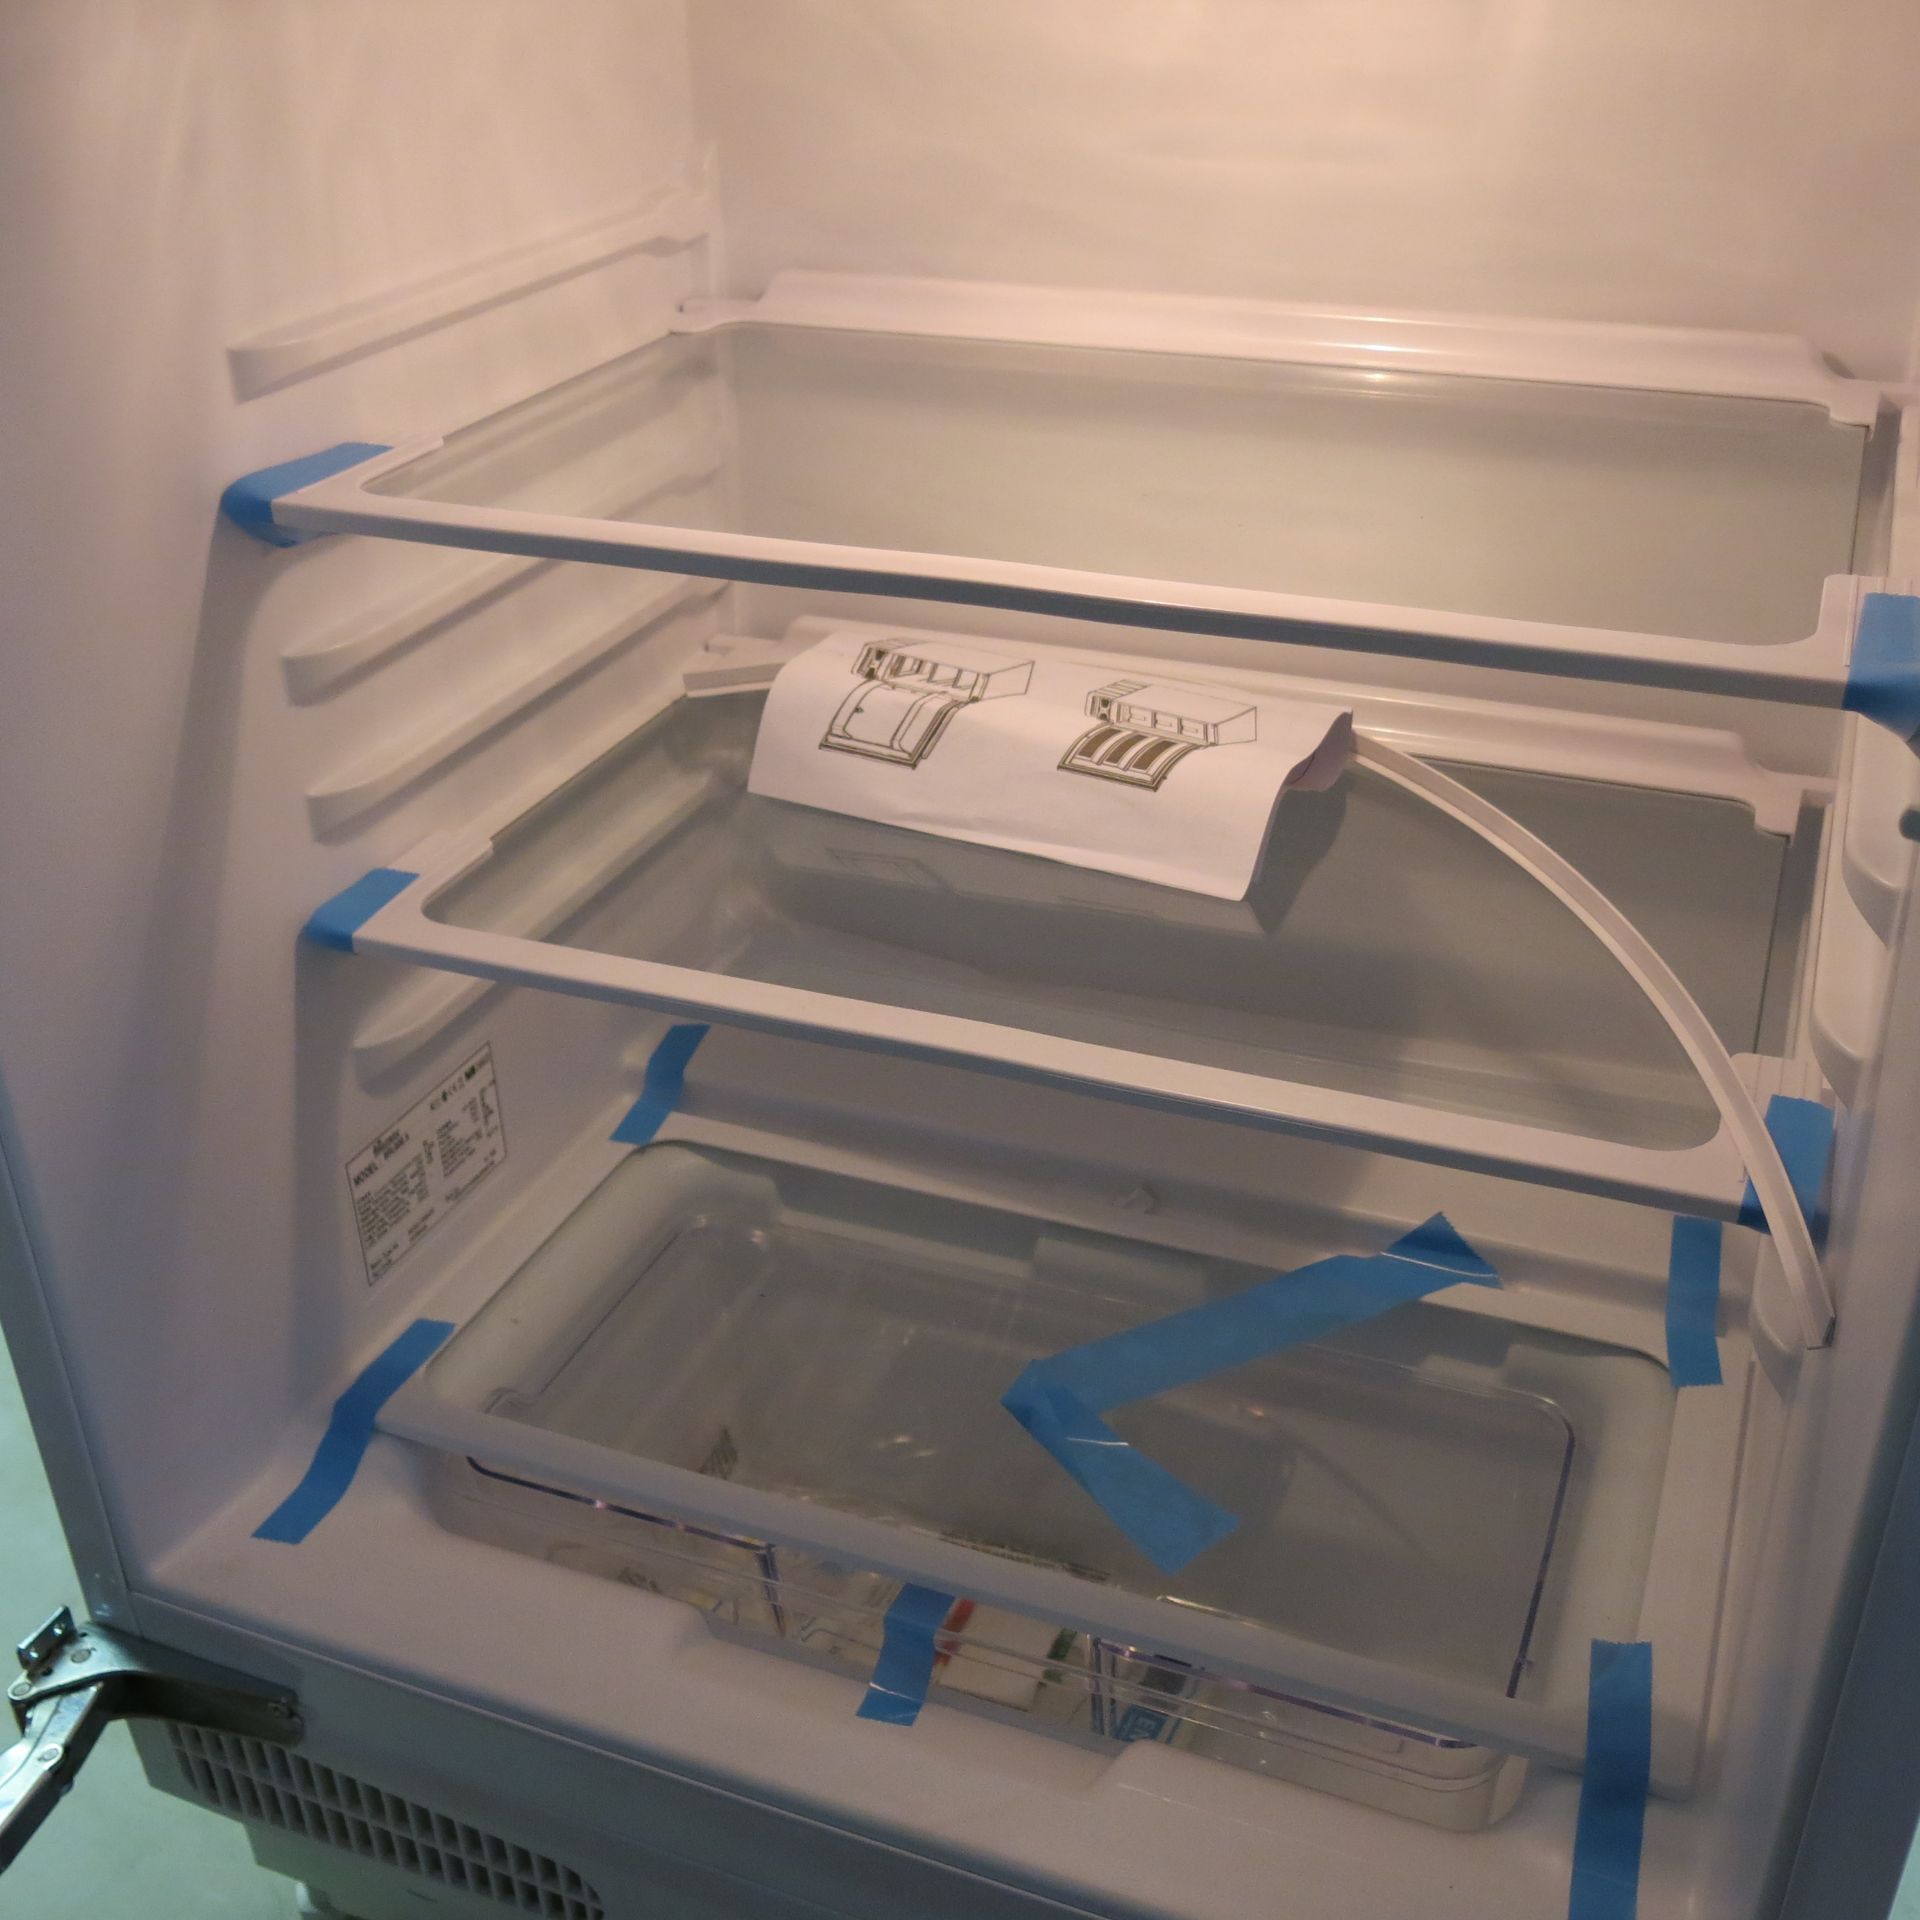 Baumatic Integrated Fridge, Model BRL600.5. Comes with Instruction Manual. Ex Display. - Image 2 of 3